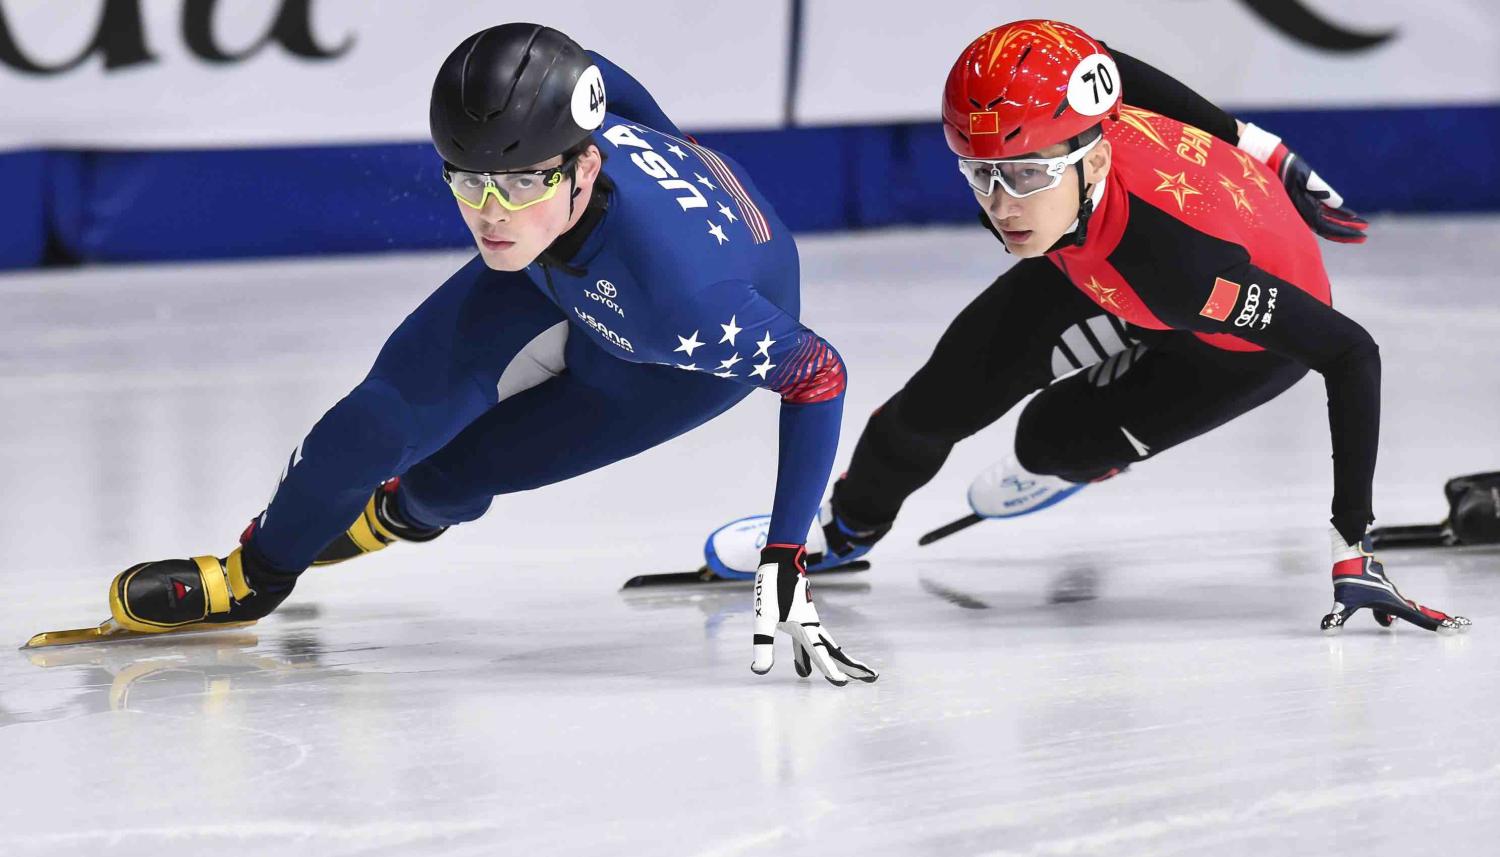 John-Henry Krueger of the US and Hongzhi Xu of China in the World Short Track Speed Skating Championships in Montreal in March (Photo: Minas Panagiotakis via Getty)